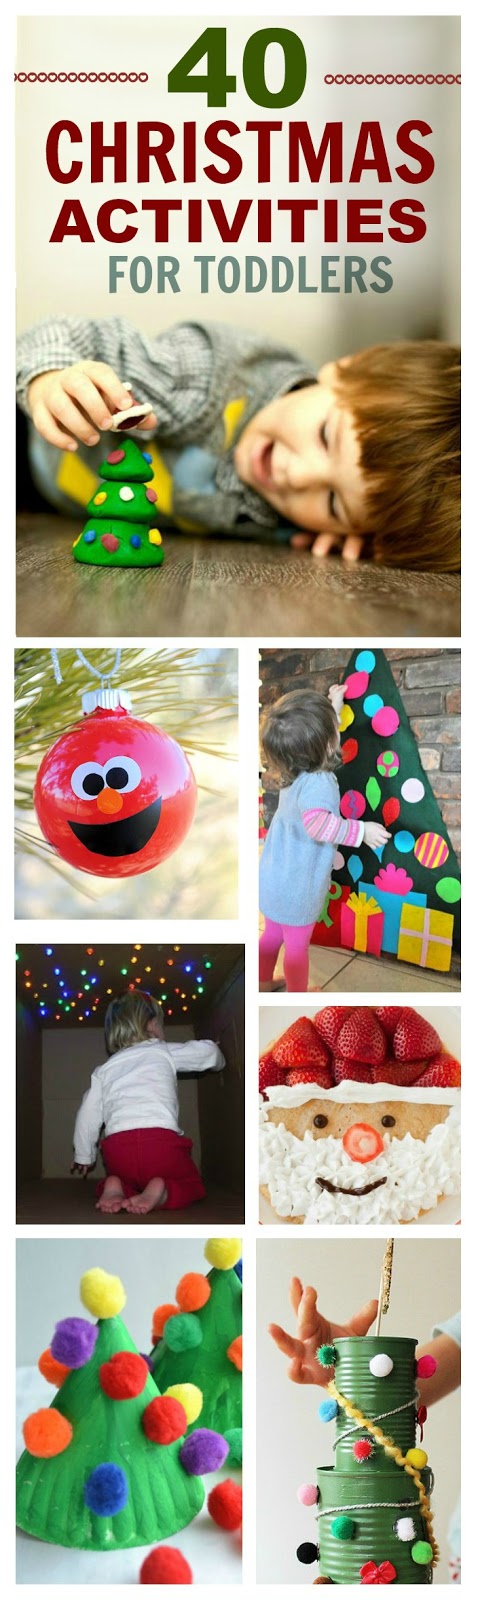  Christmas  Activities  for Toddlers  Growing A Jeweled Rose